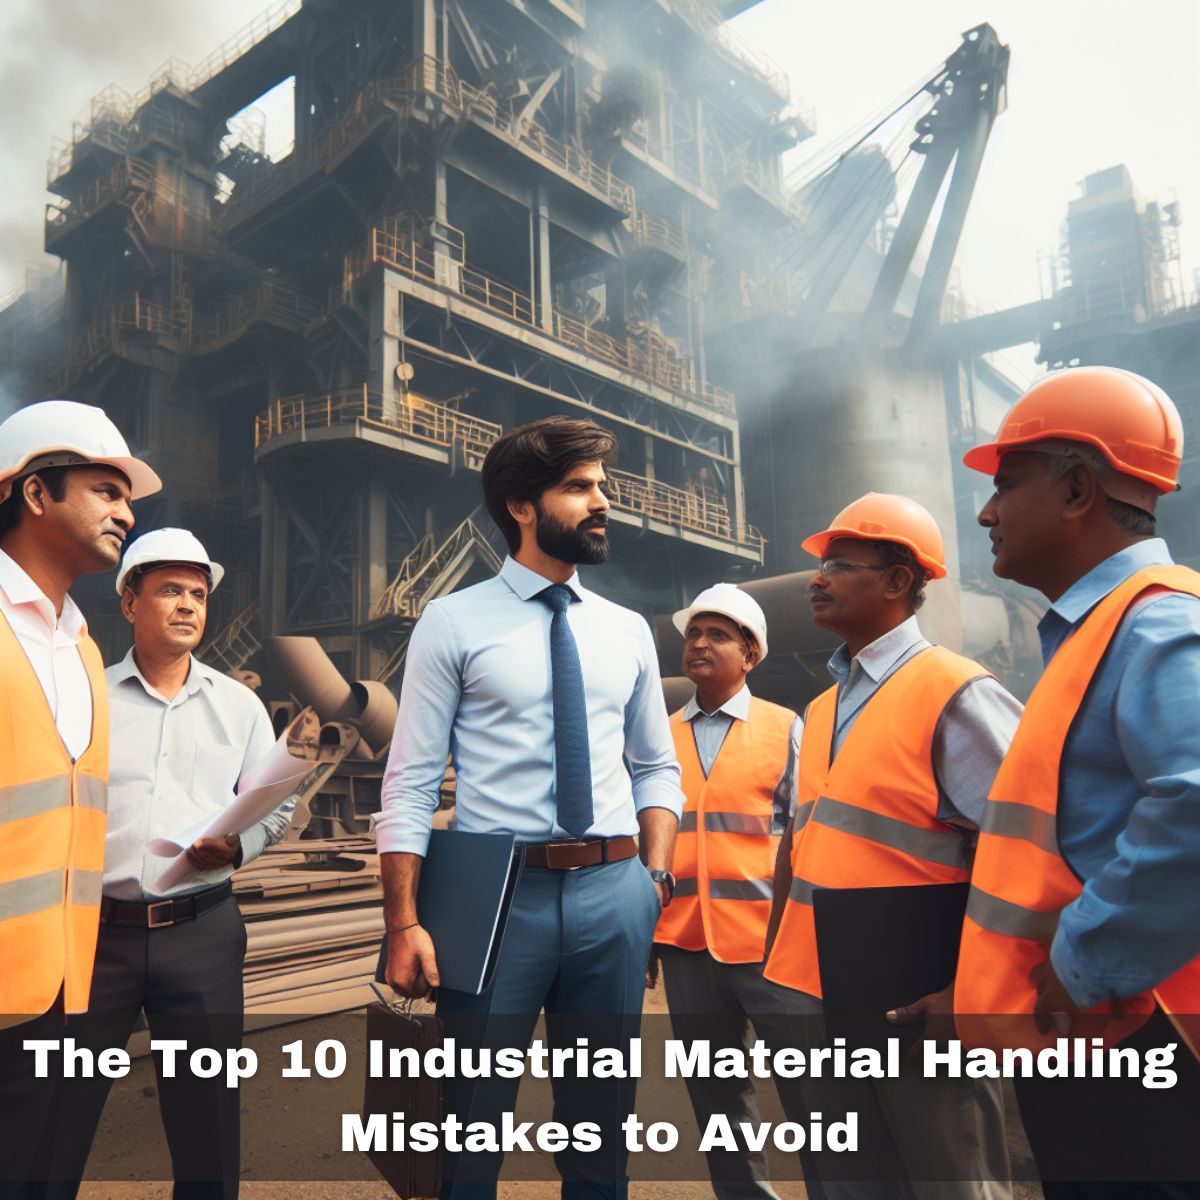 Efficient industrial material handling practices to prevent common mistakes and enhance workplace safety - MH&More